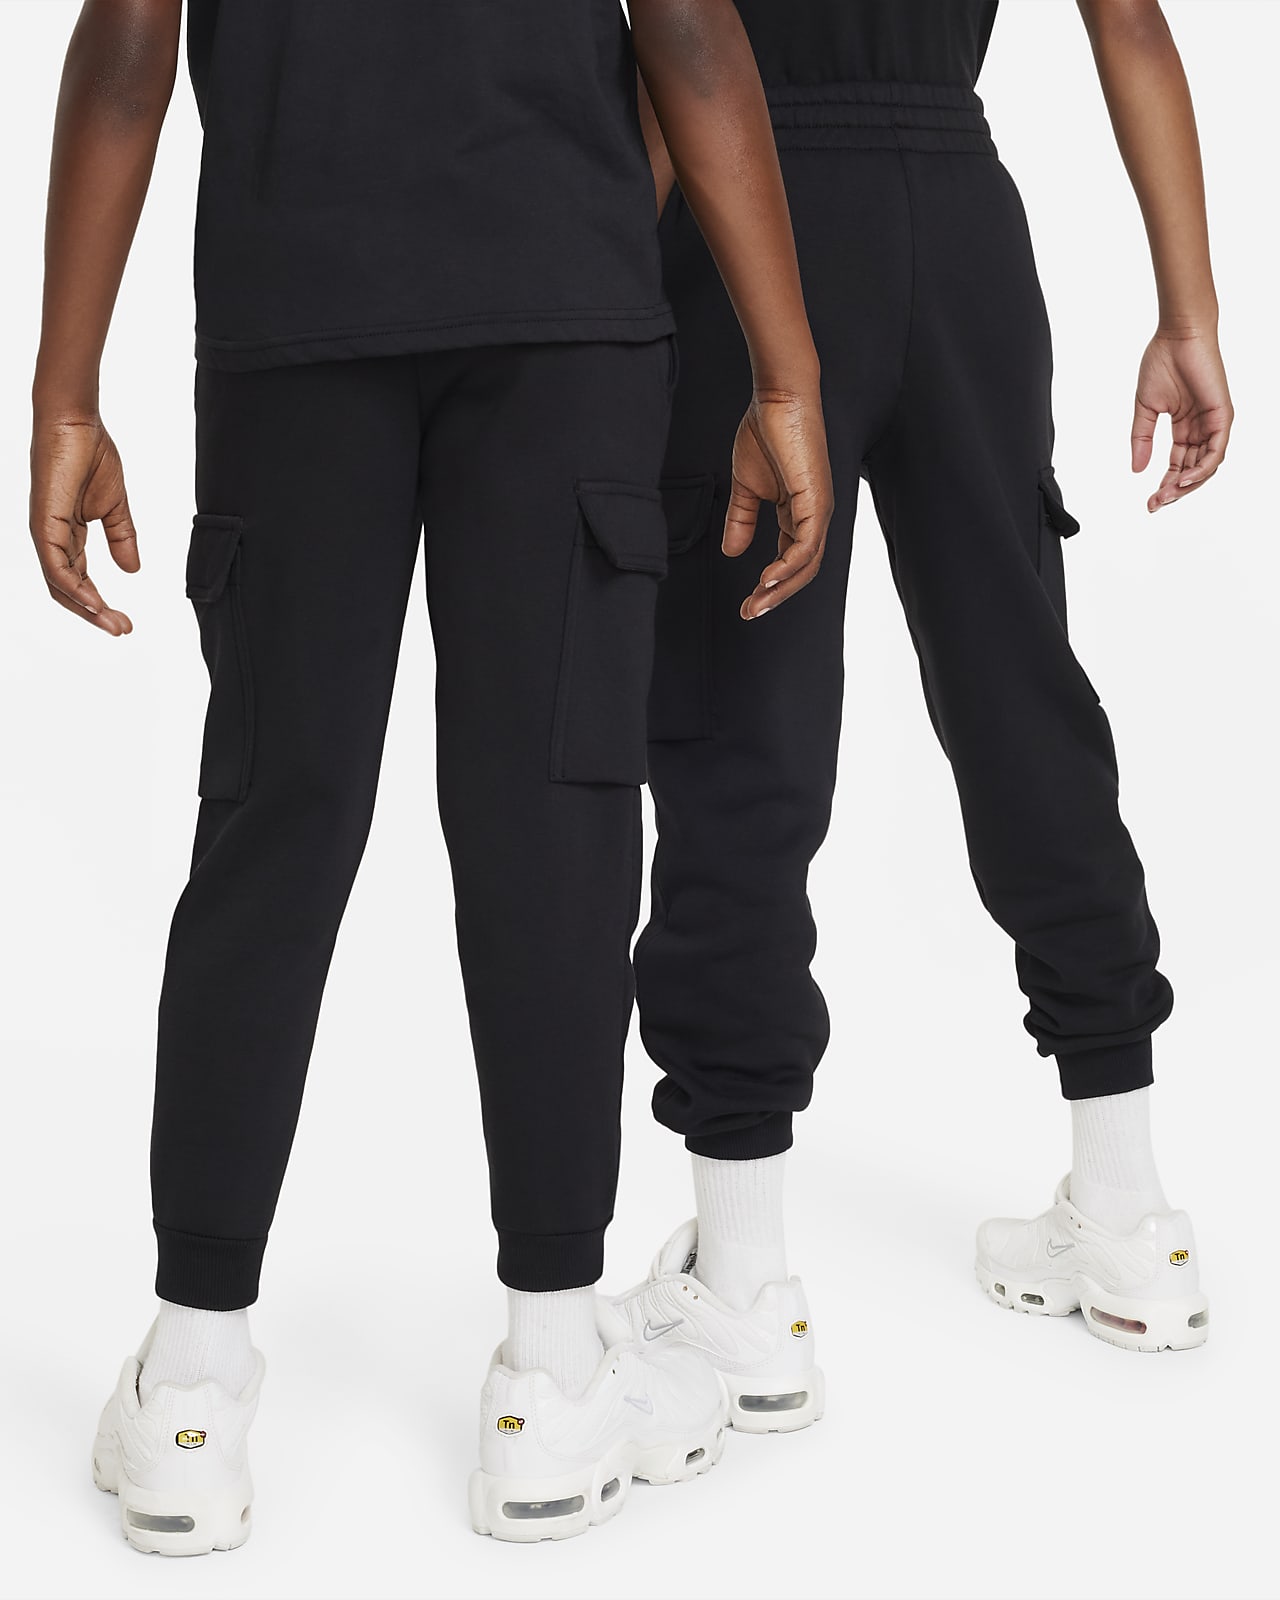 My Favorite Cargo Pants! Nike Sportswear Cargo Pant Review, On Body, Sizing  and Fit 